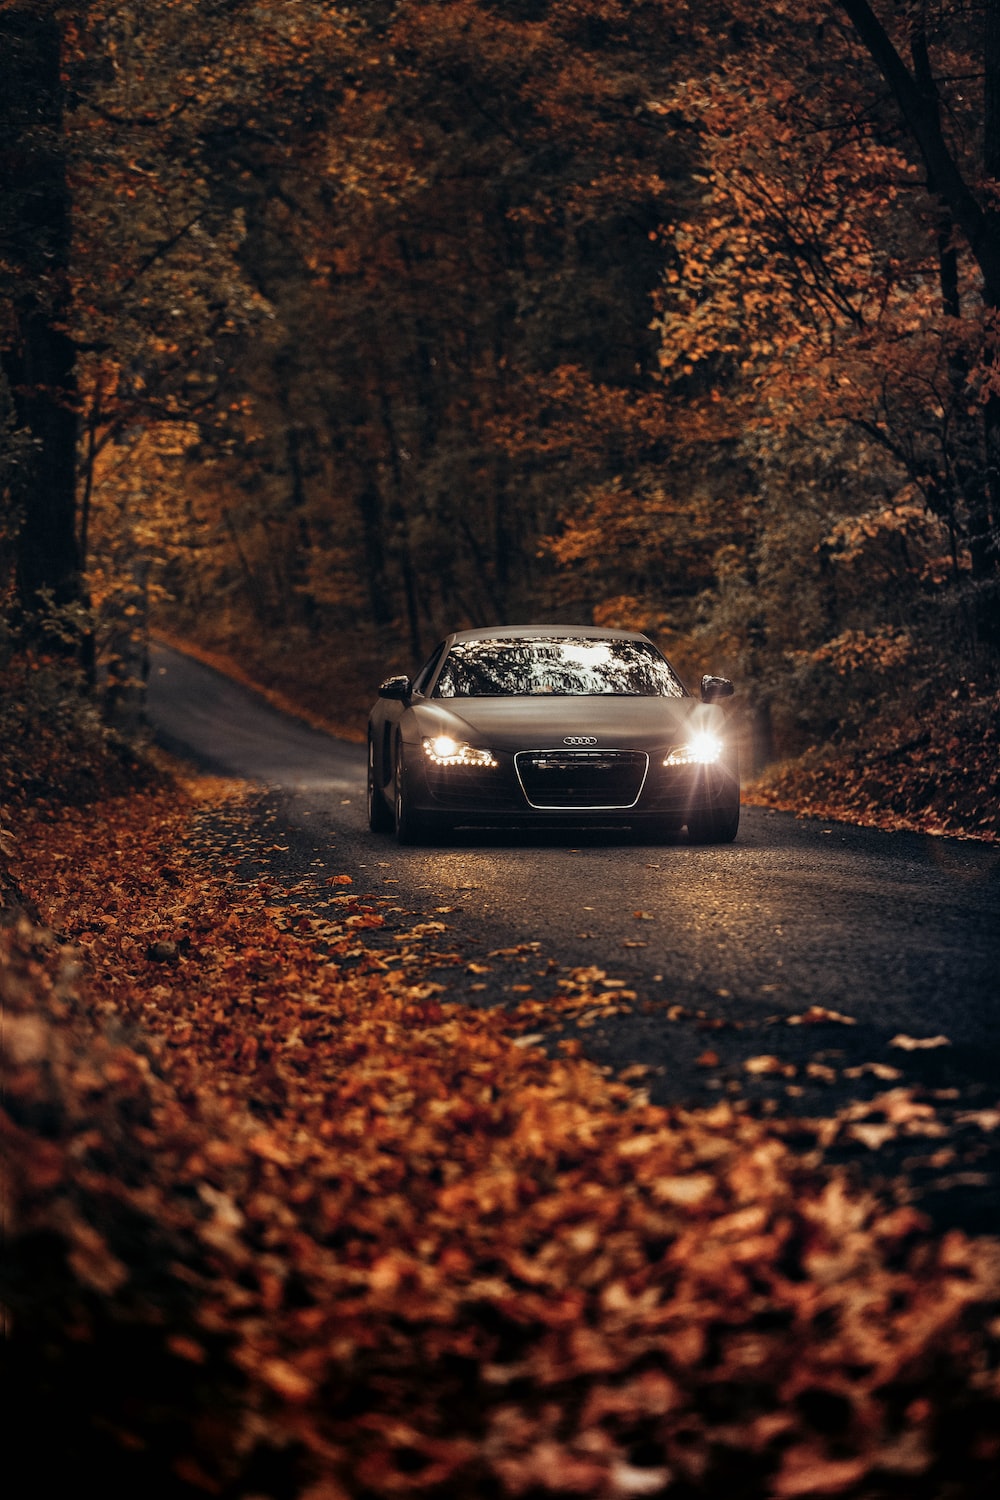 Autumn car pictures download free images on